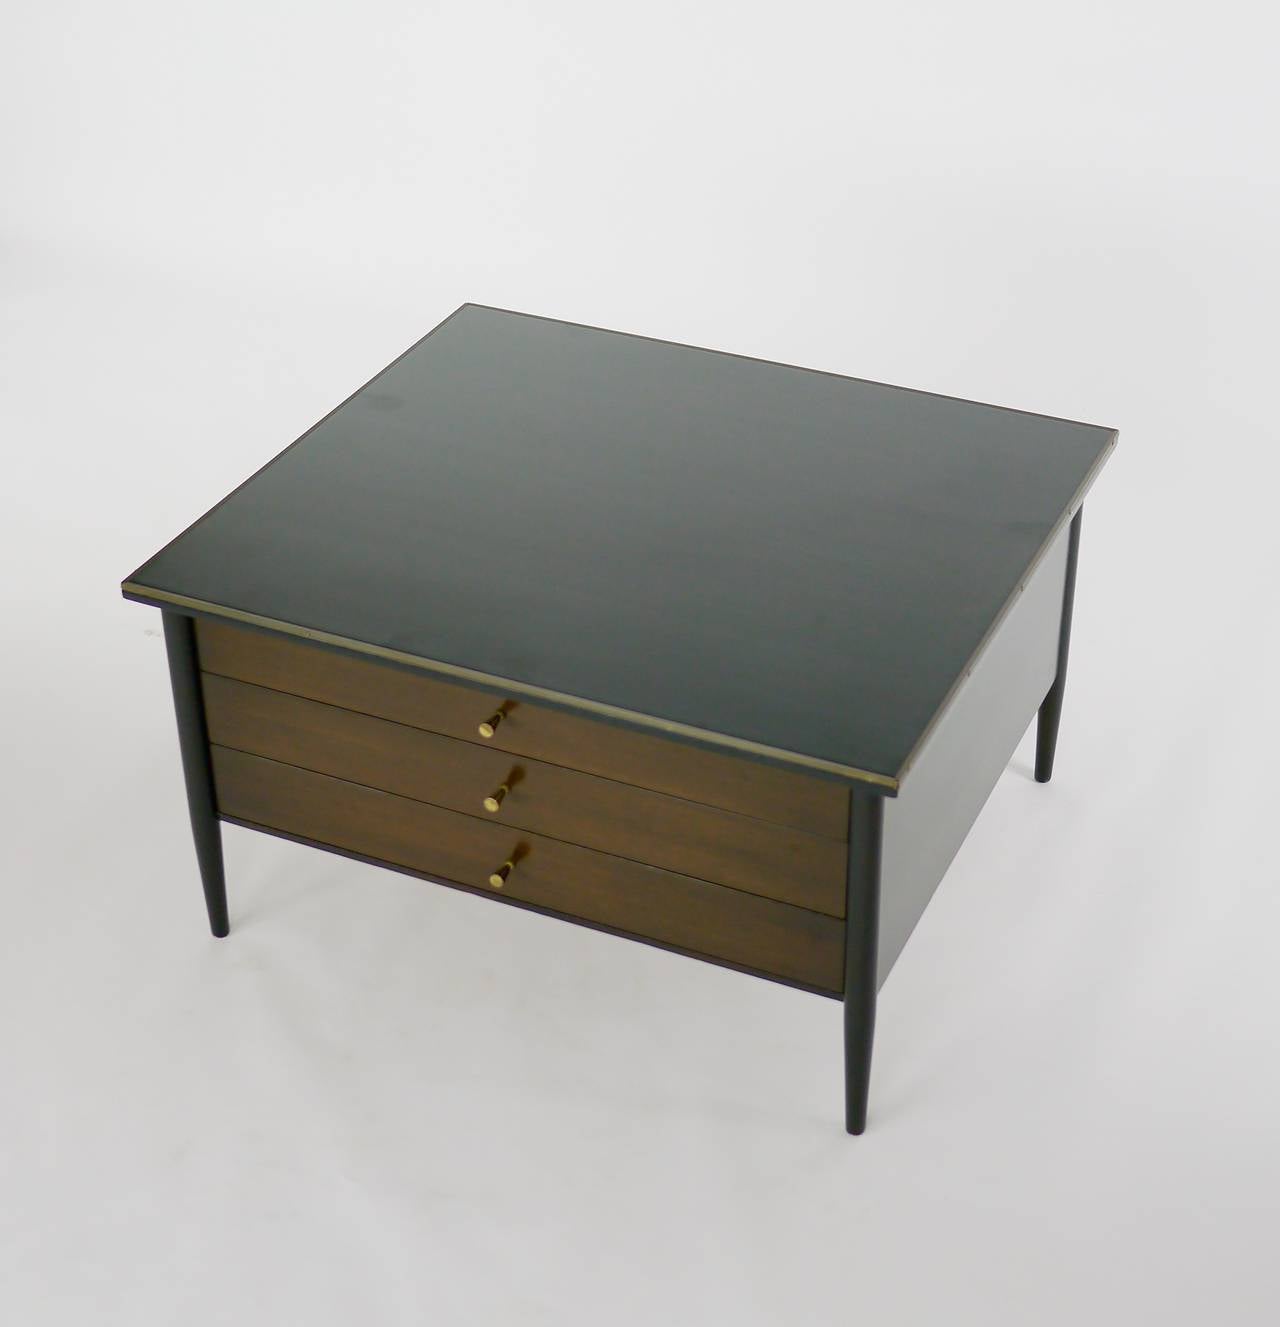 3 drawer side table with chrome pulls. Brass accent to top edges. Black Micarta top. Labeled Connoiseur Collection by Paul McCobb for H. Sacks to drawer interior. Two toned finish, drawers in Walnut, the case in an Ebony finish. 
Designed to